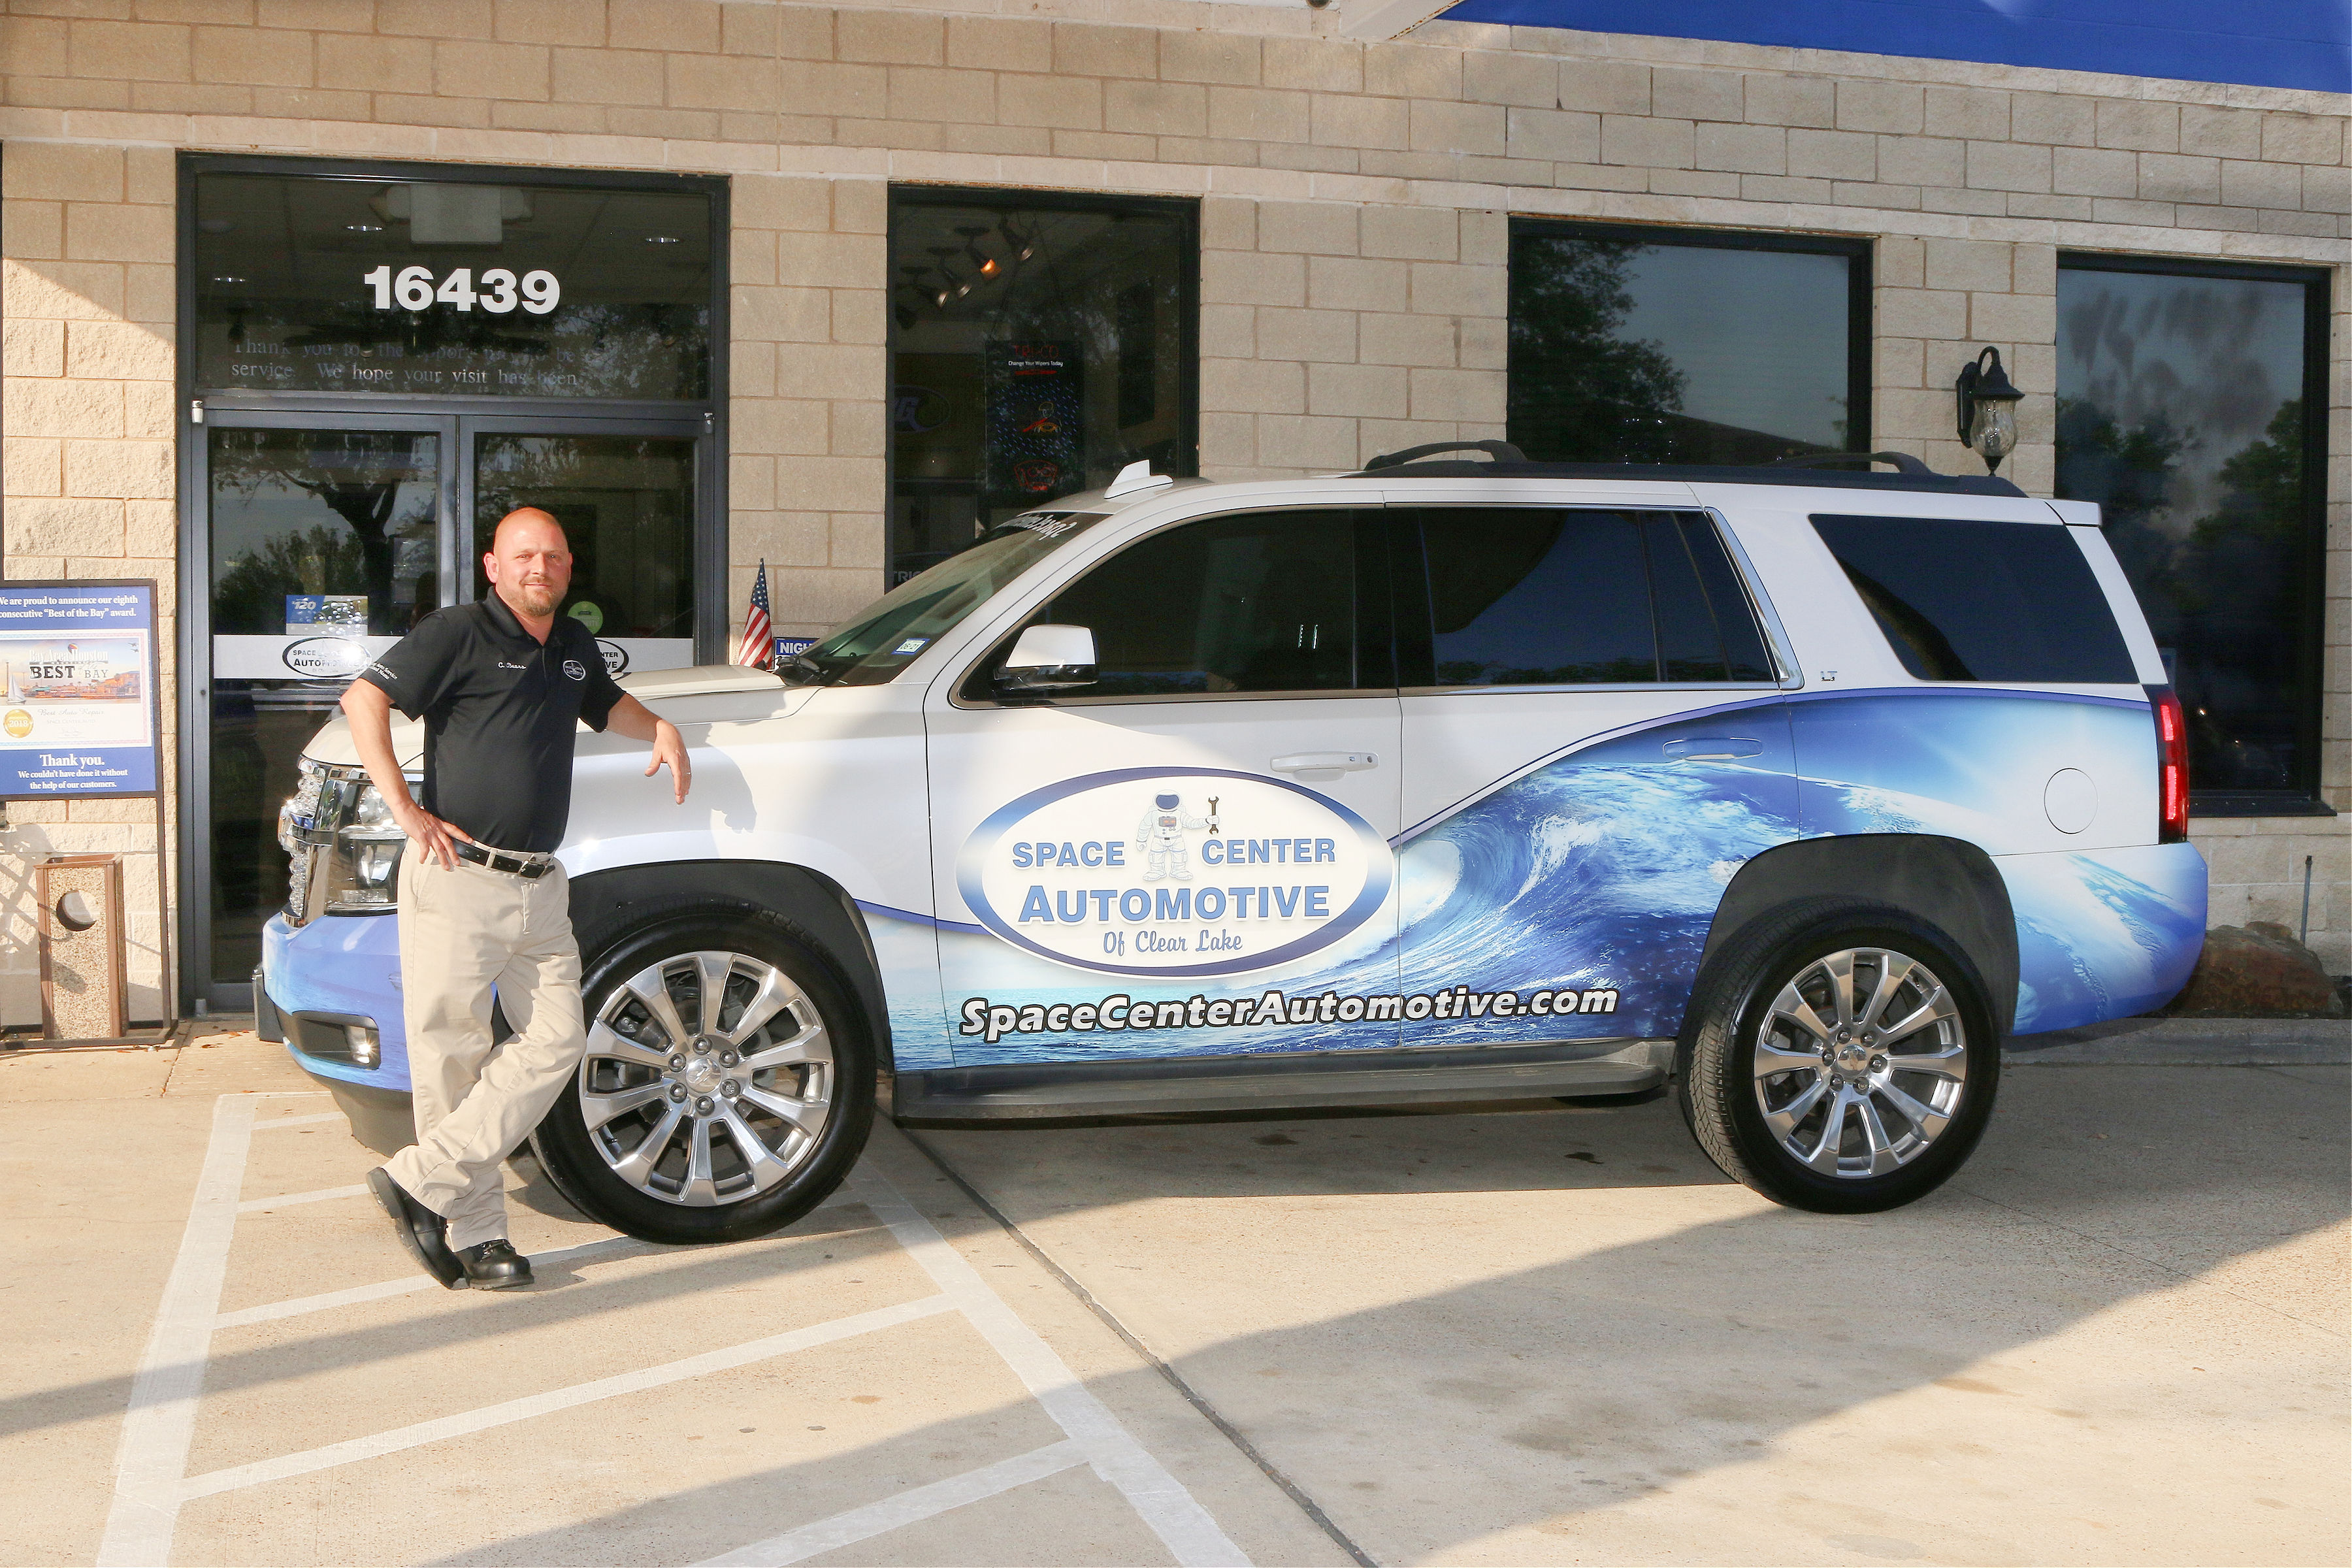 Chris Beers | Space Center Automotive of Clear Lake